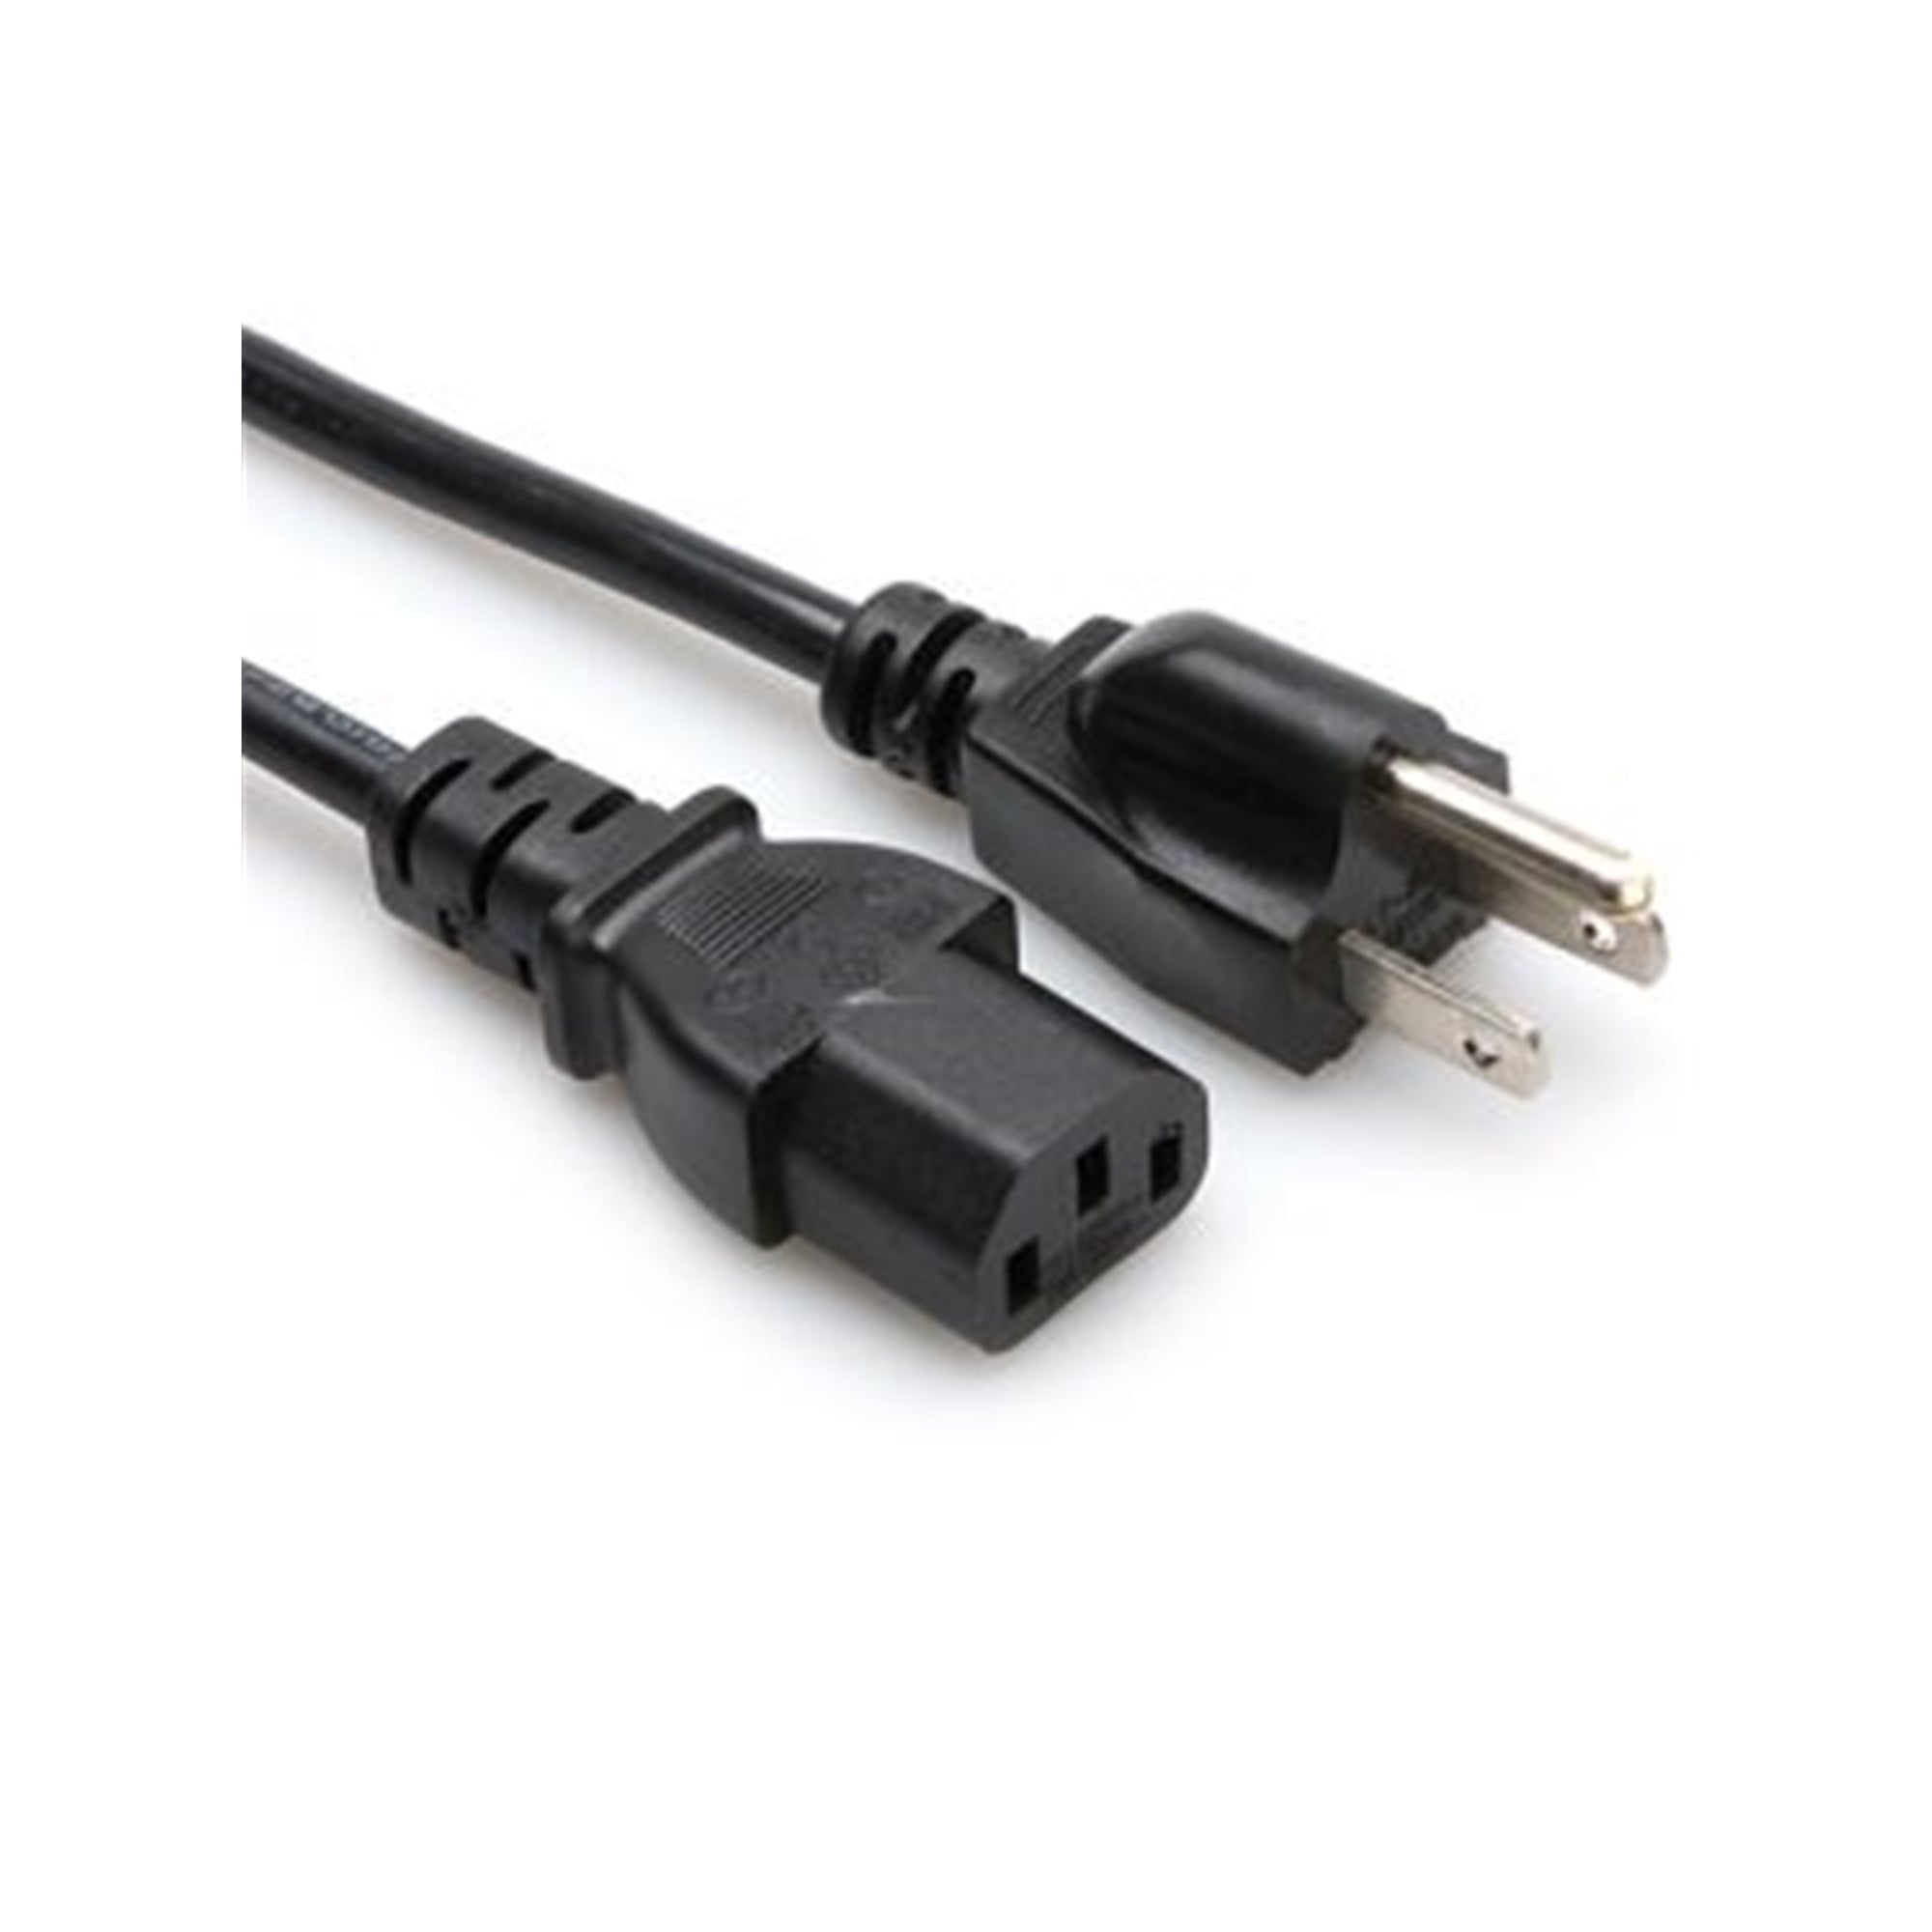 HOSA PWC148 8' Grounded 3 Wire Power Cable